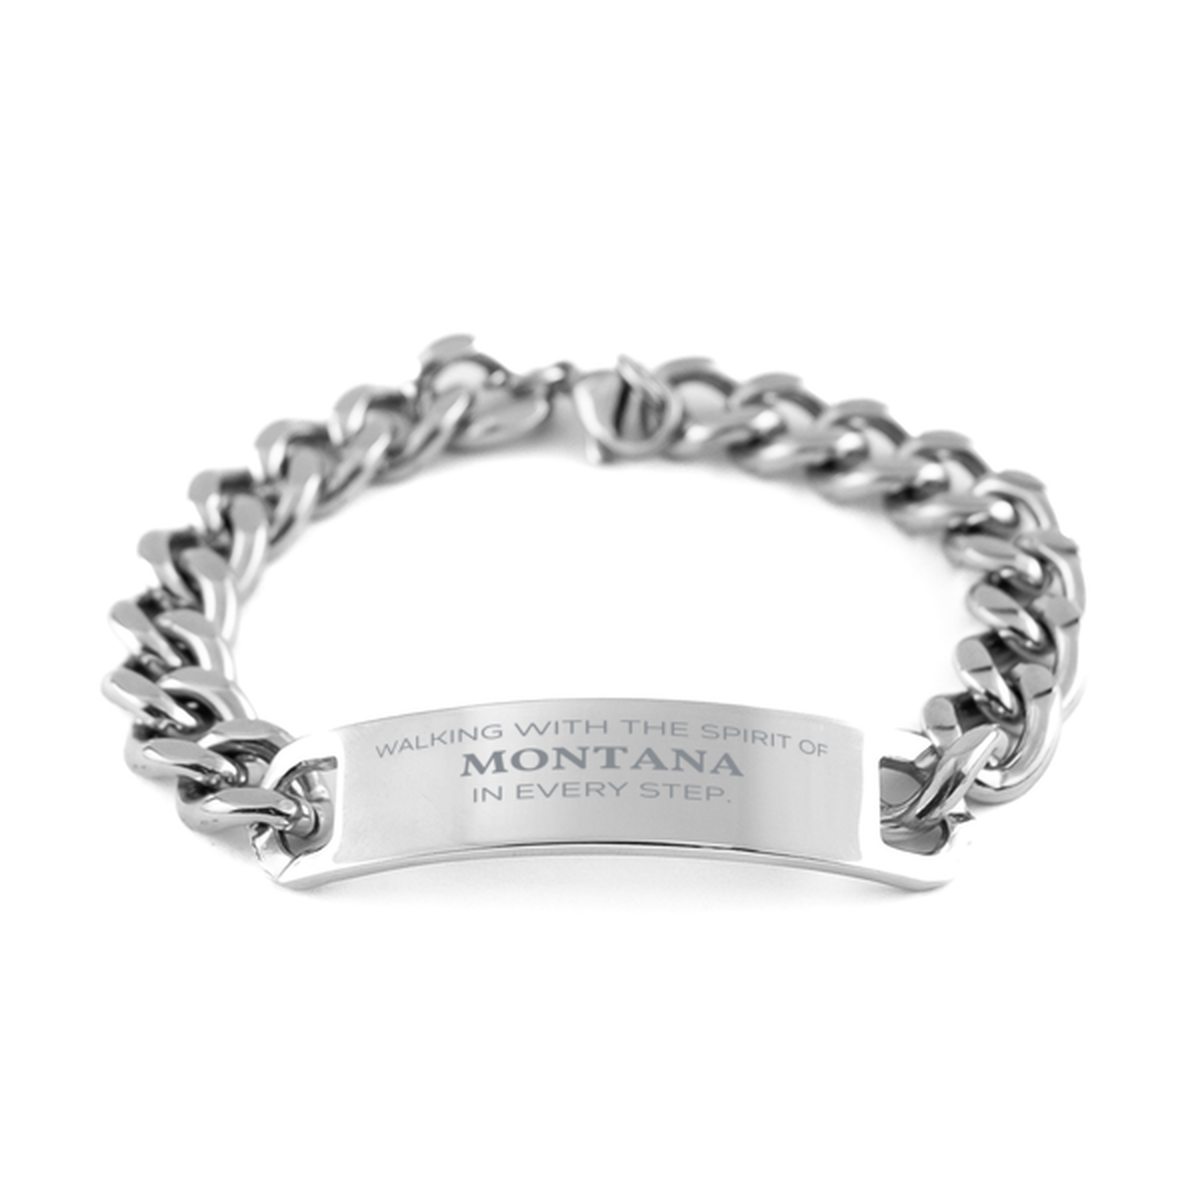 Montana Gifts, Walking with the spirit, Love Montana Birthday Christmas Cuban Chain Stainless Steel Bracelet For Montana People, Men, Women, Friends